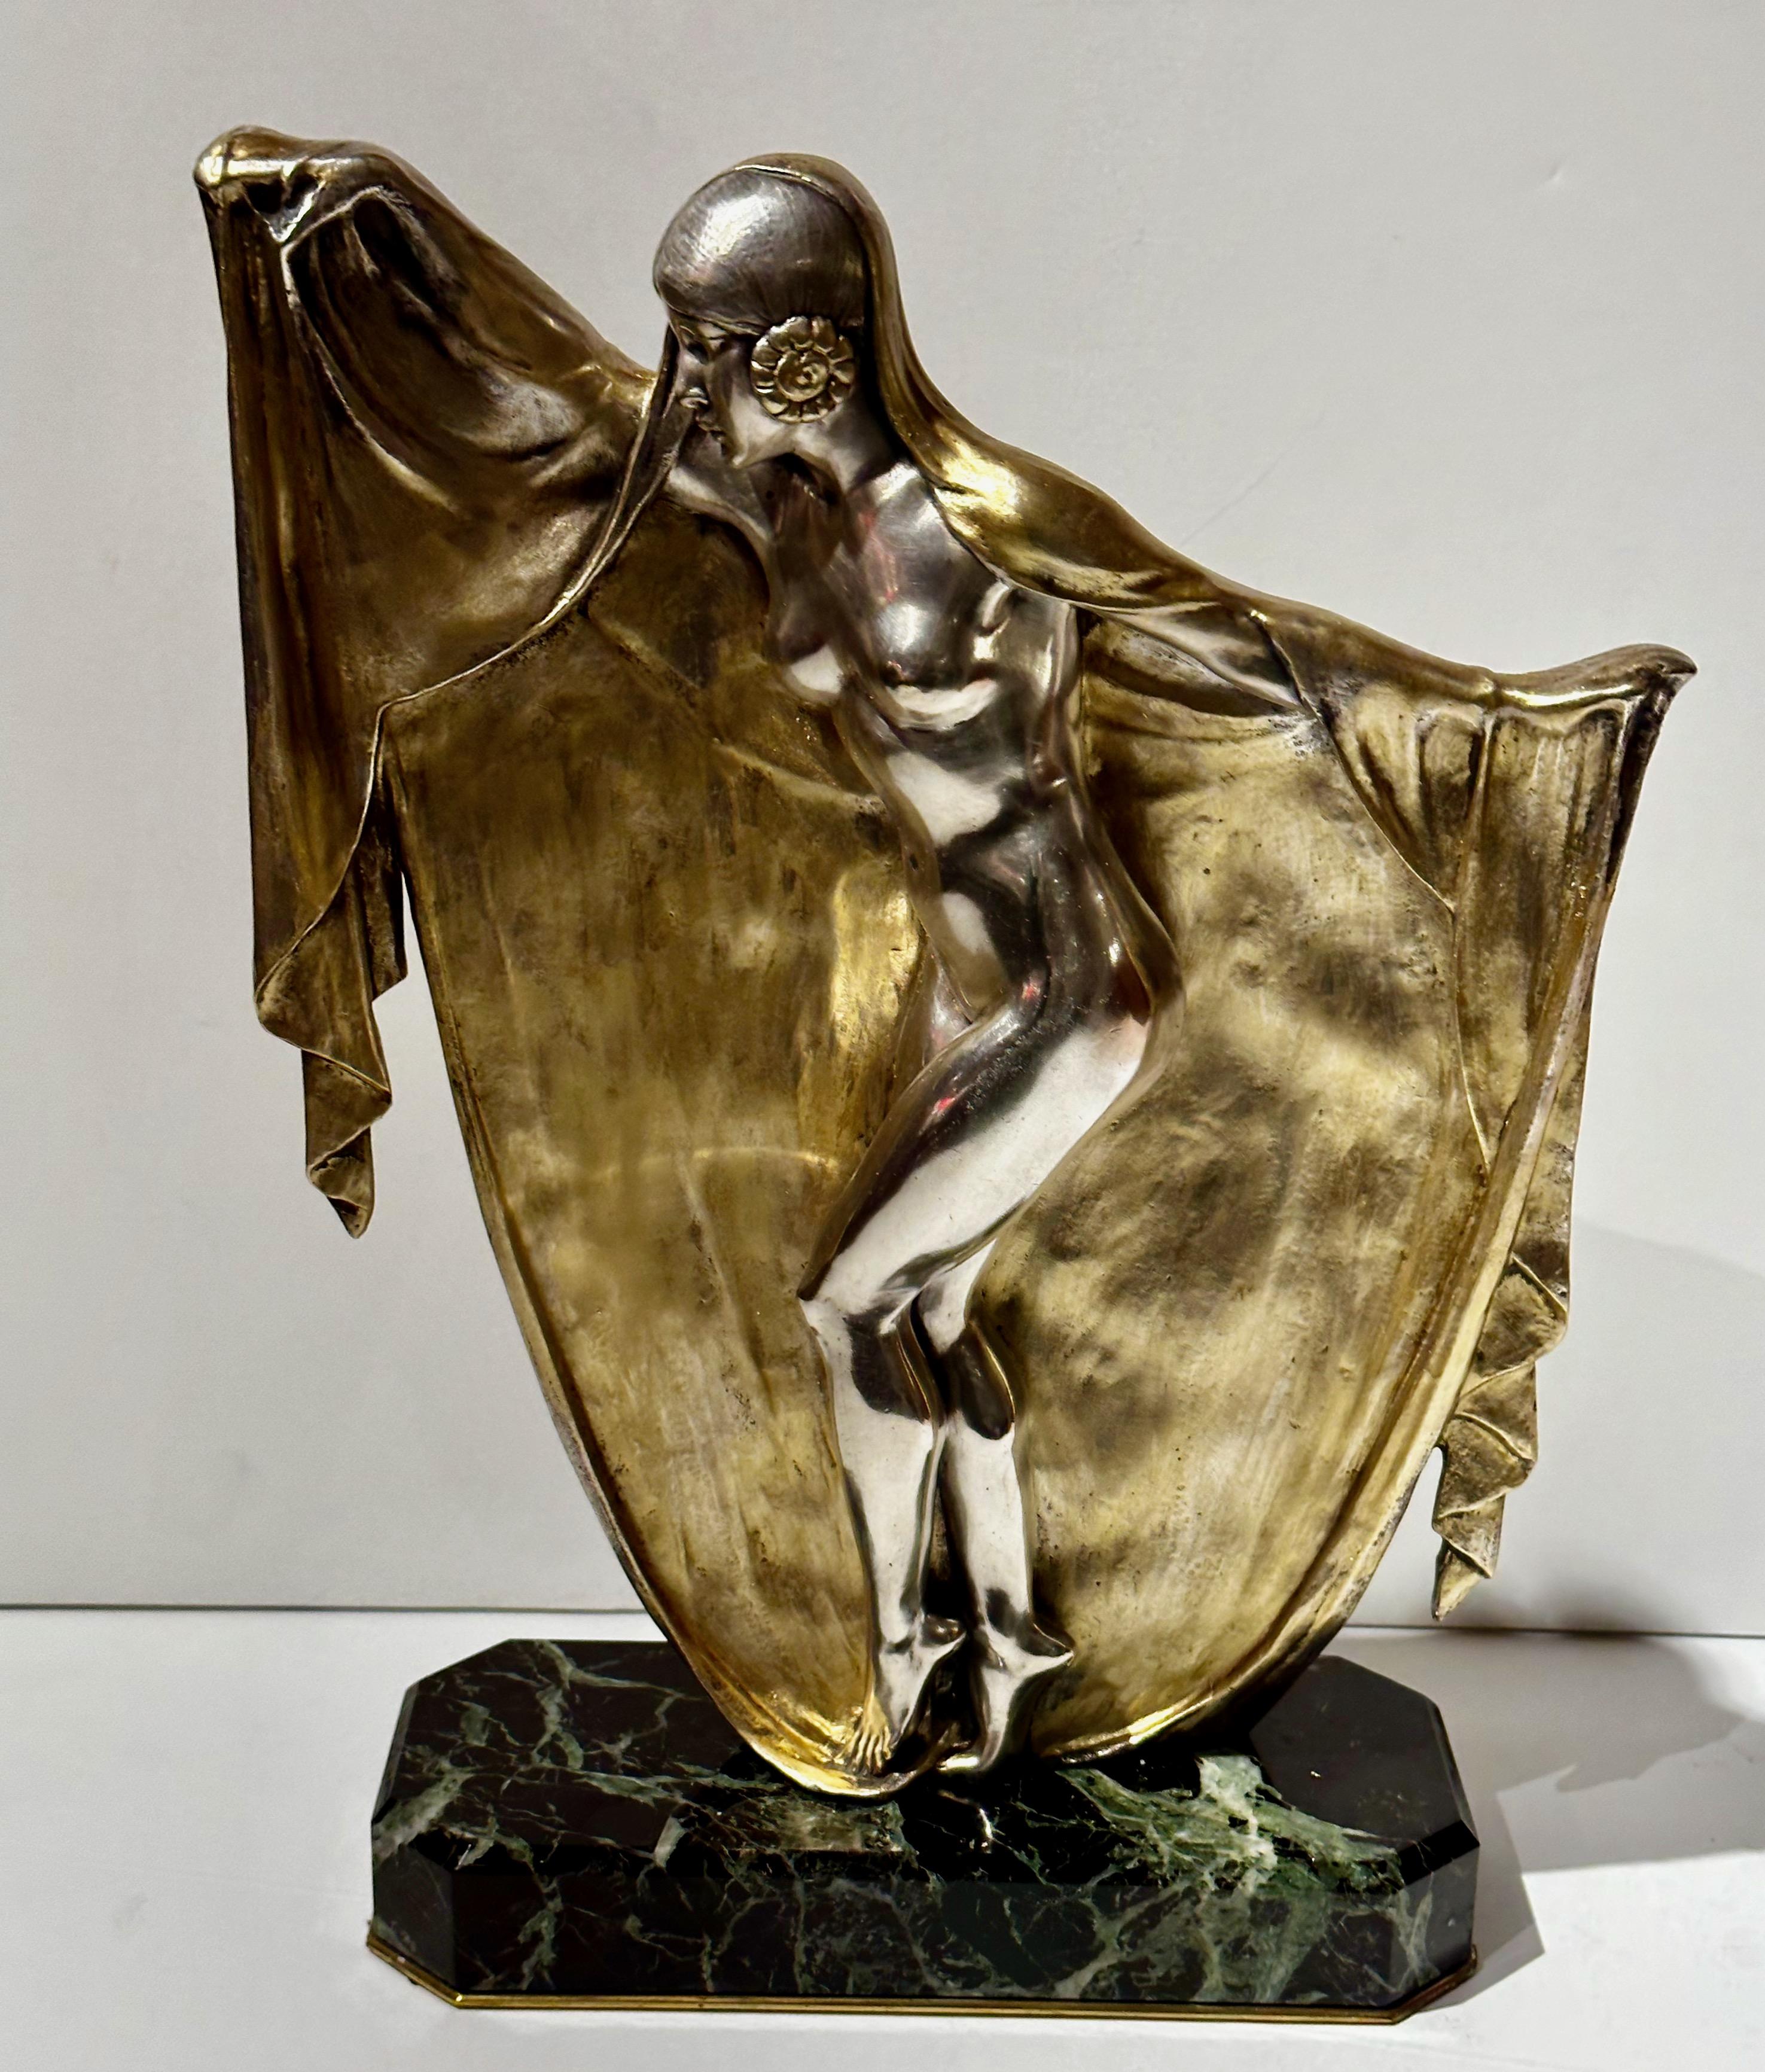 Bronze Art Deco Veil Dancer mounted on marble by Armand Lemo. This sculpture depicts a dancing woman in the Art Deco style, with a veil-like element incorporated into the design. This double-patinated finish uses bronze, gold, and silver, a